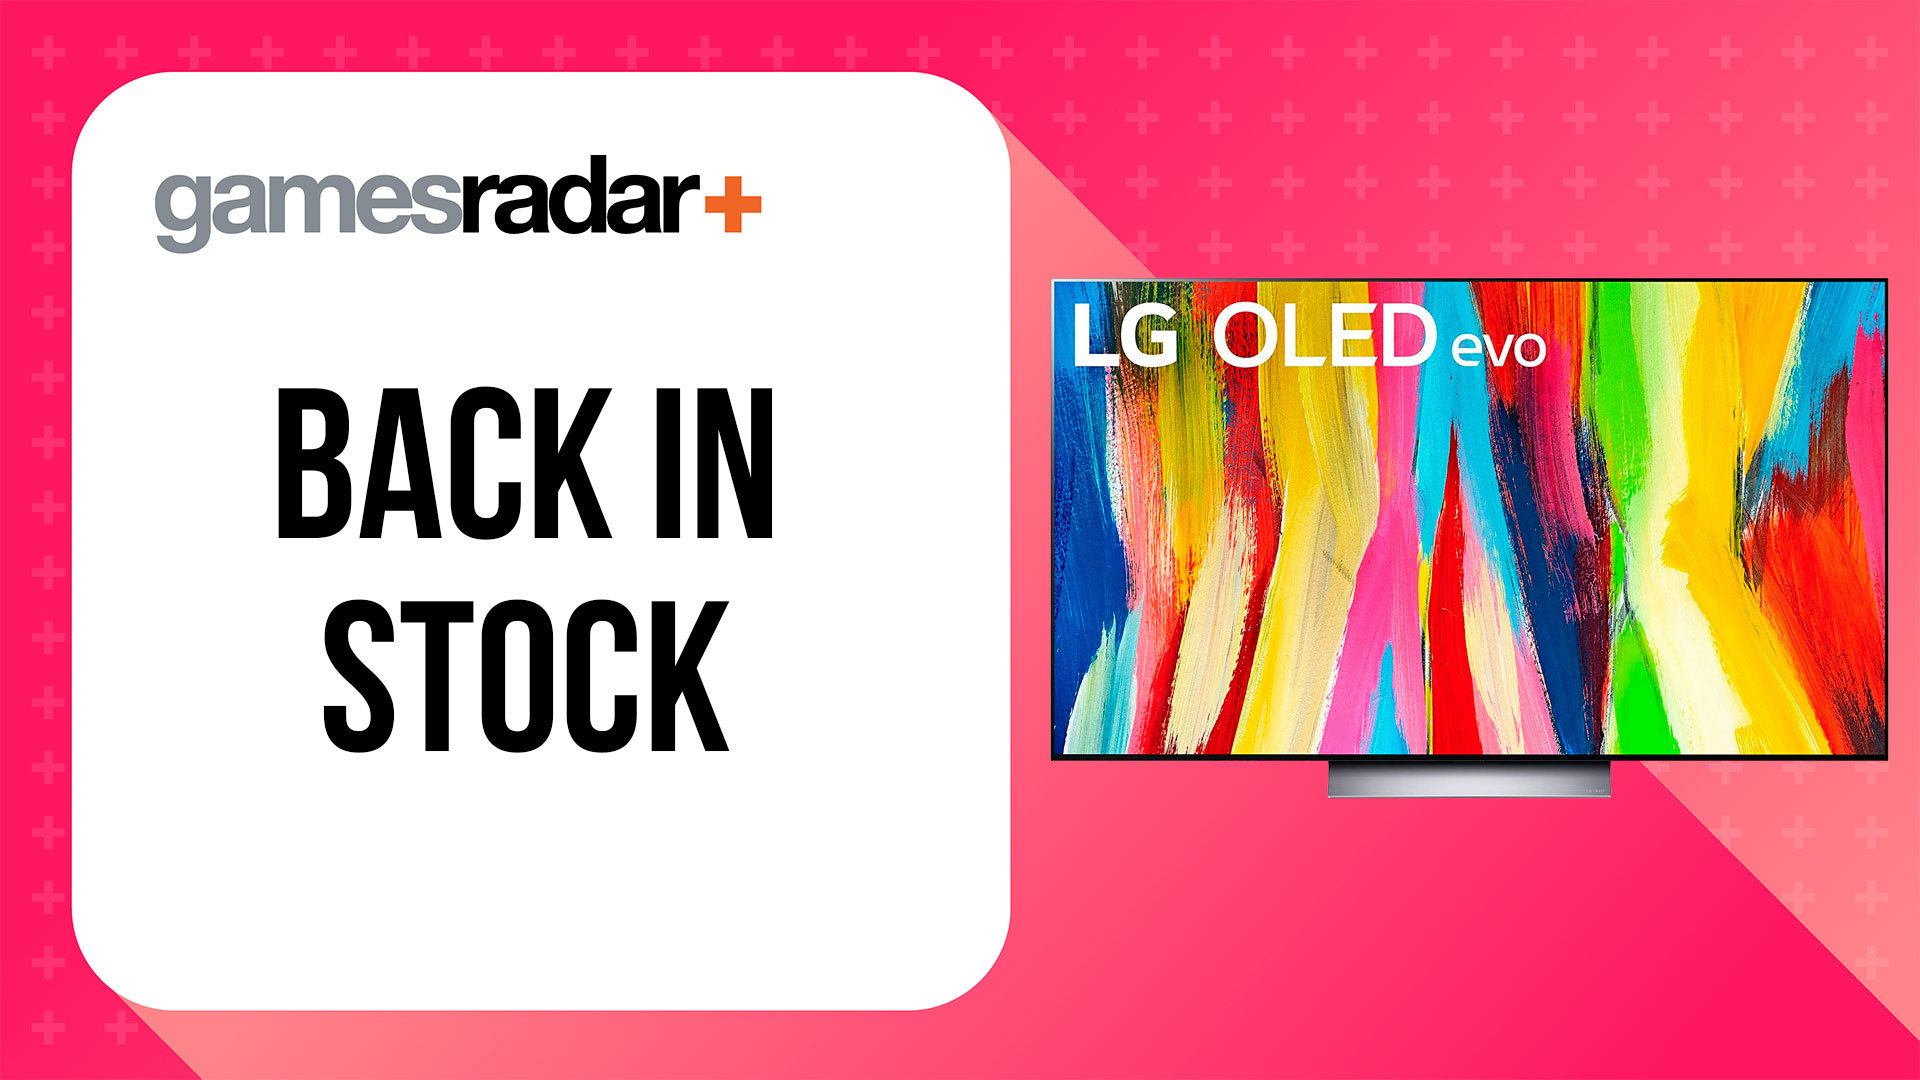 LG C2 deal - US 55 inch back in stock at Amazon